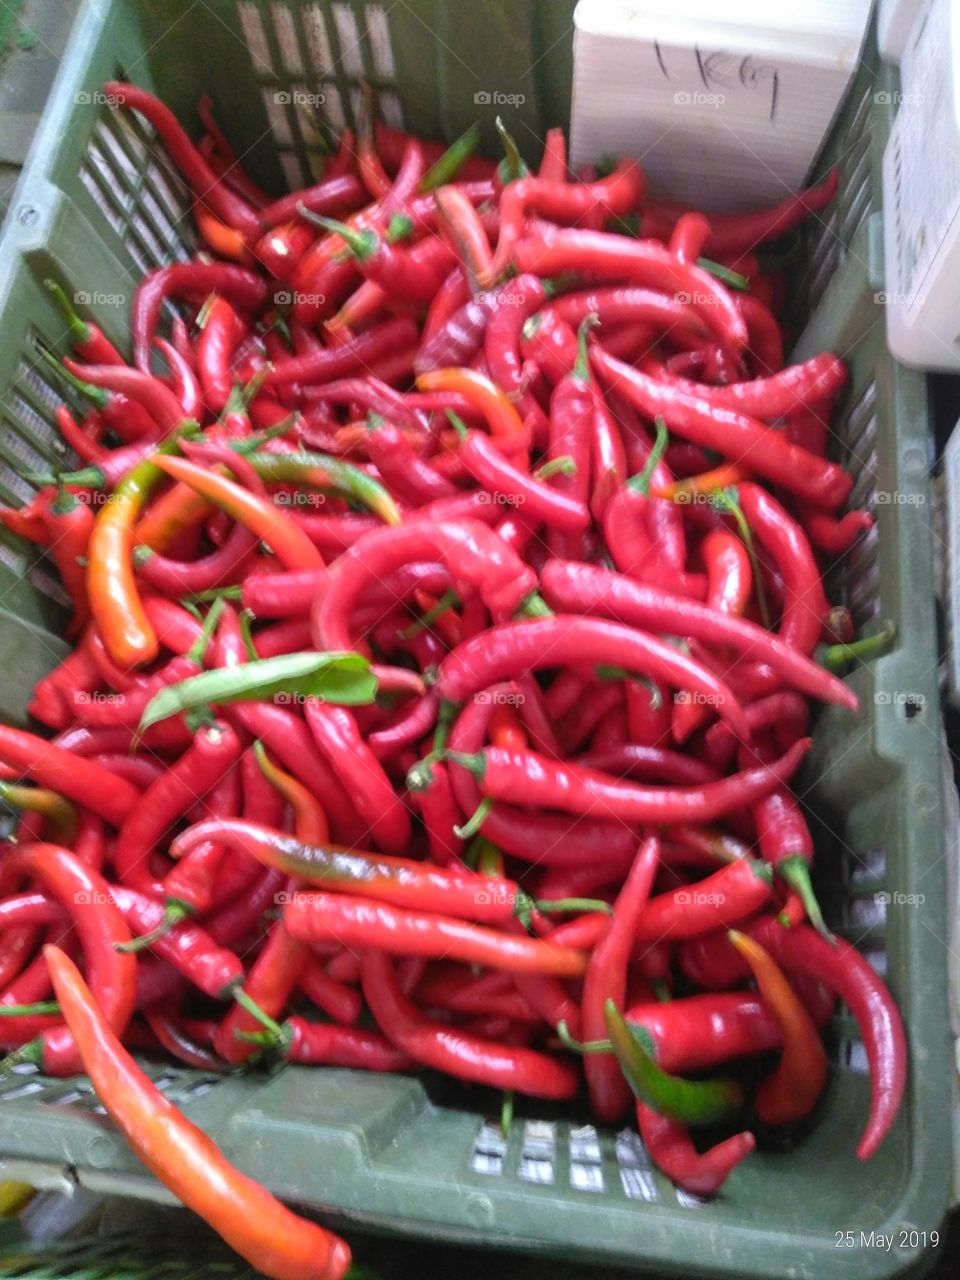 Hot red Chillies at the market.
#craftyartificer
#food
#chili
#Chilli